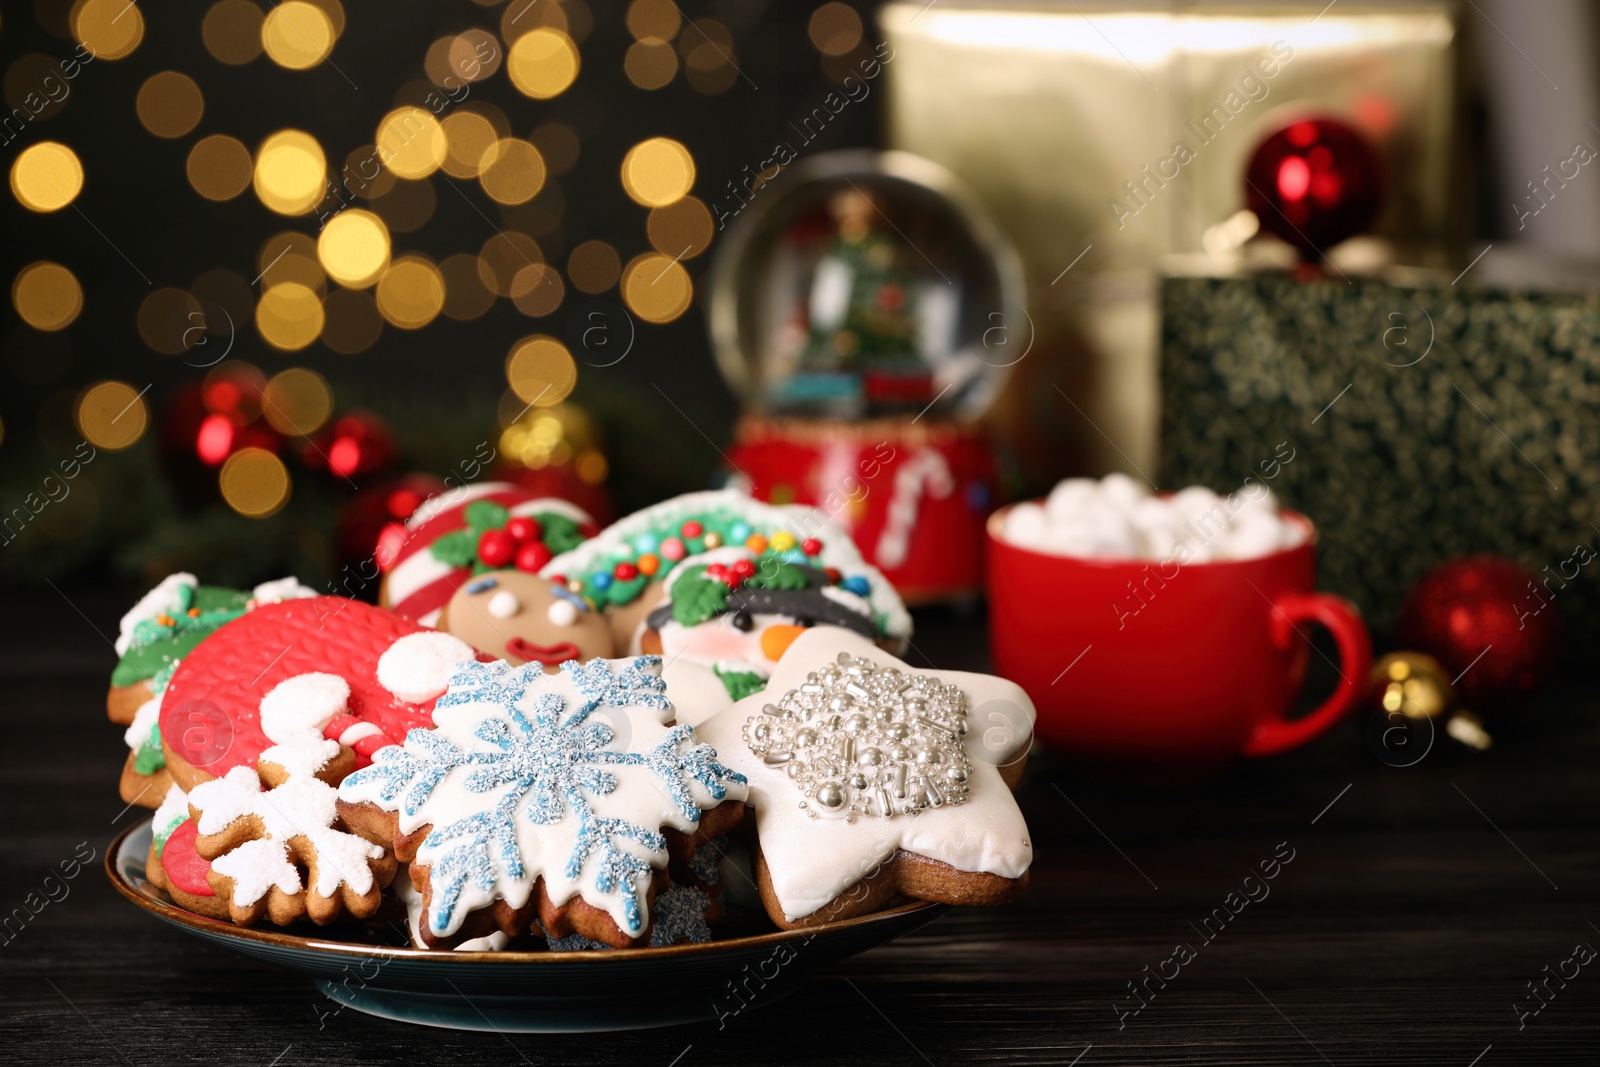 Photo of Sweet Christmas cookies and decor on black wooden table against blurred festive lights